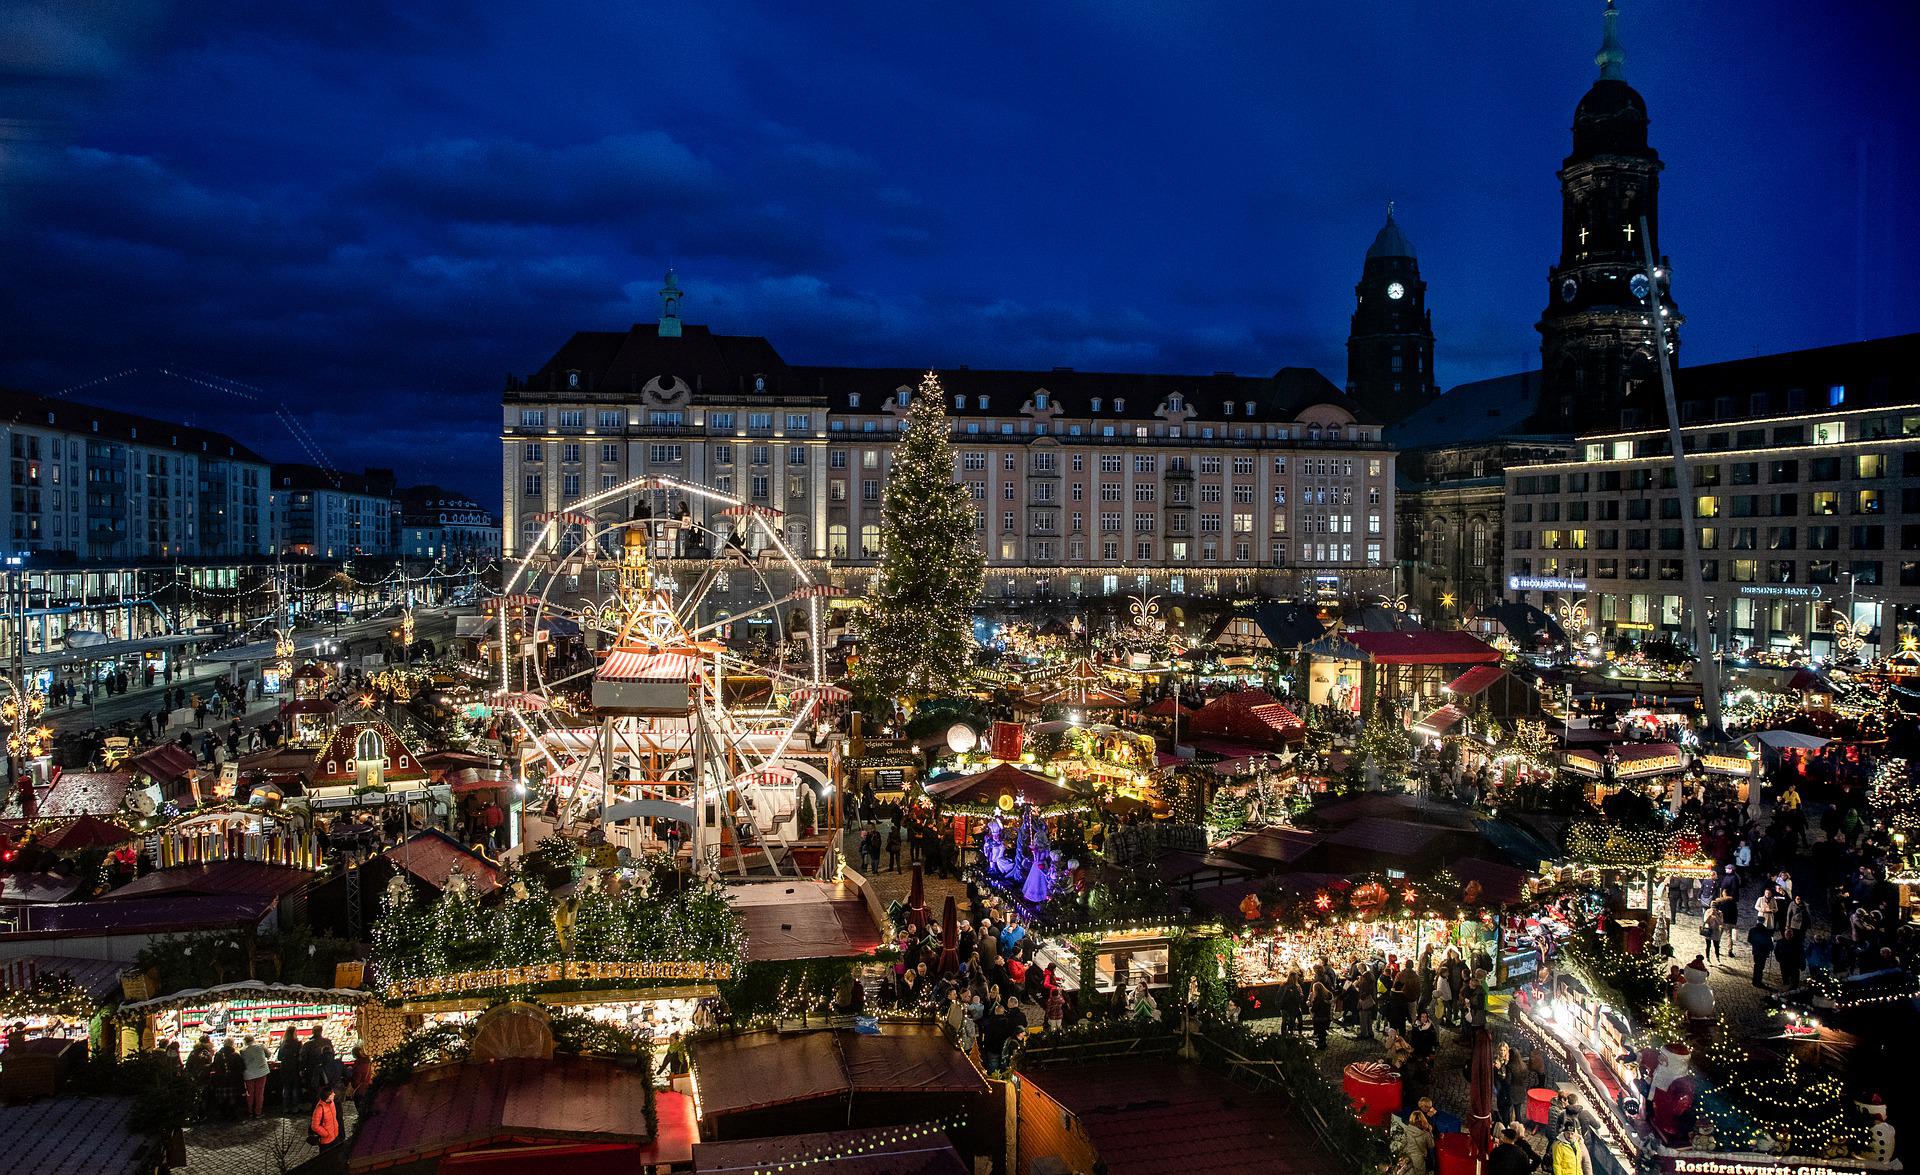 Top 10 places to celebrate Christmas around the world Cologne Christmas Market Germany